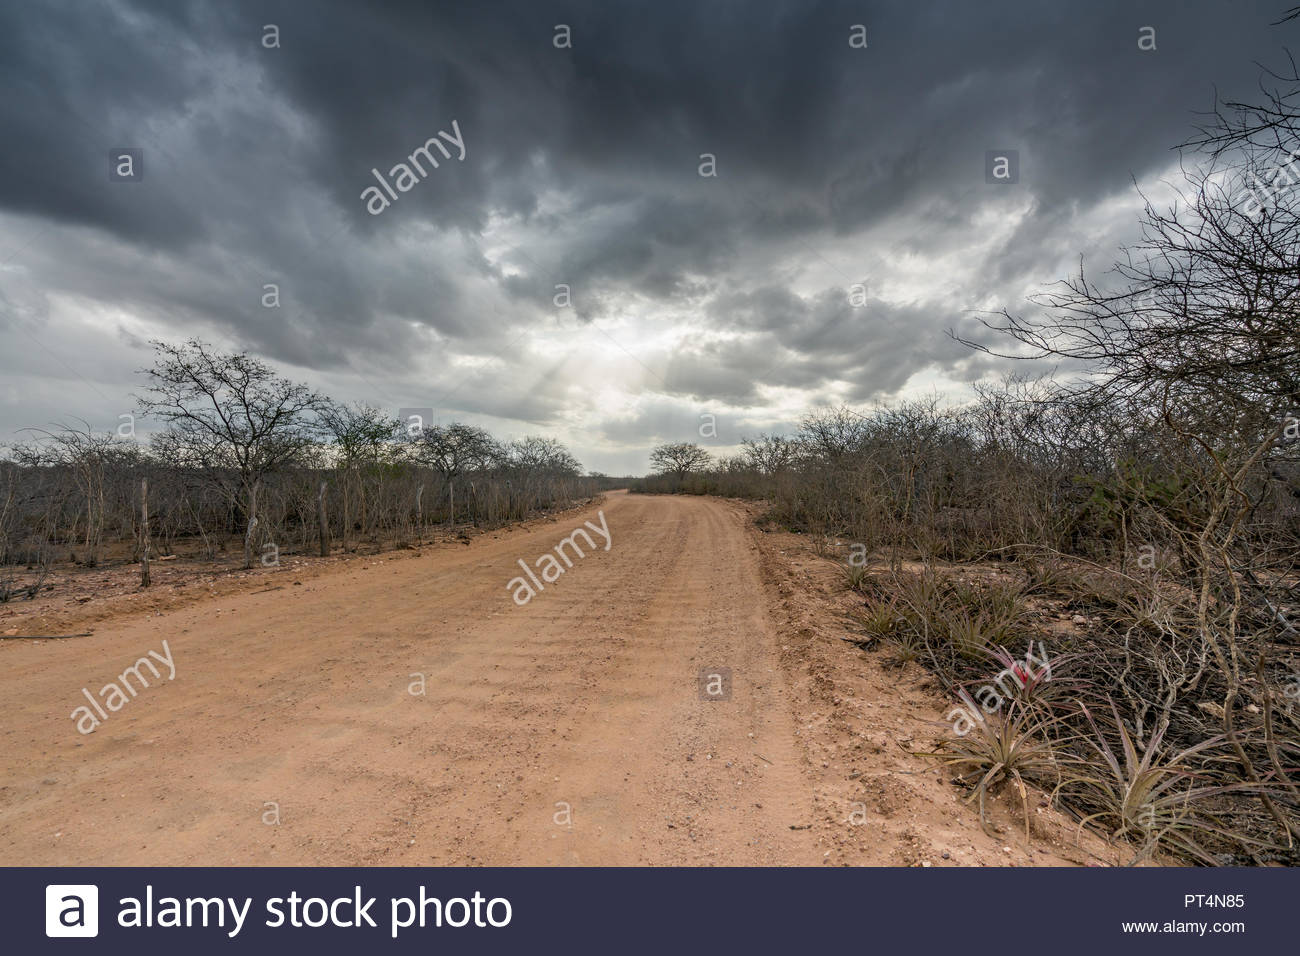 Countryside Dry Desert Road Landscape Background With Northeast